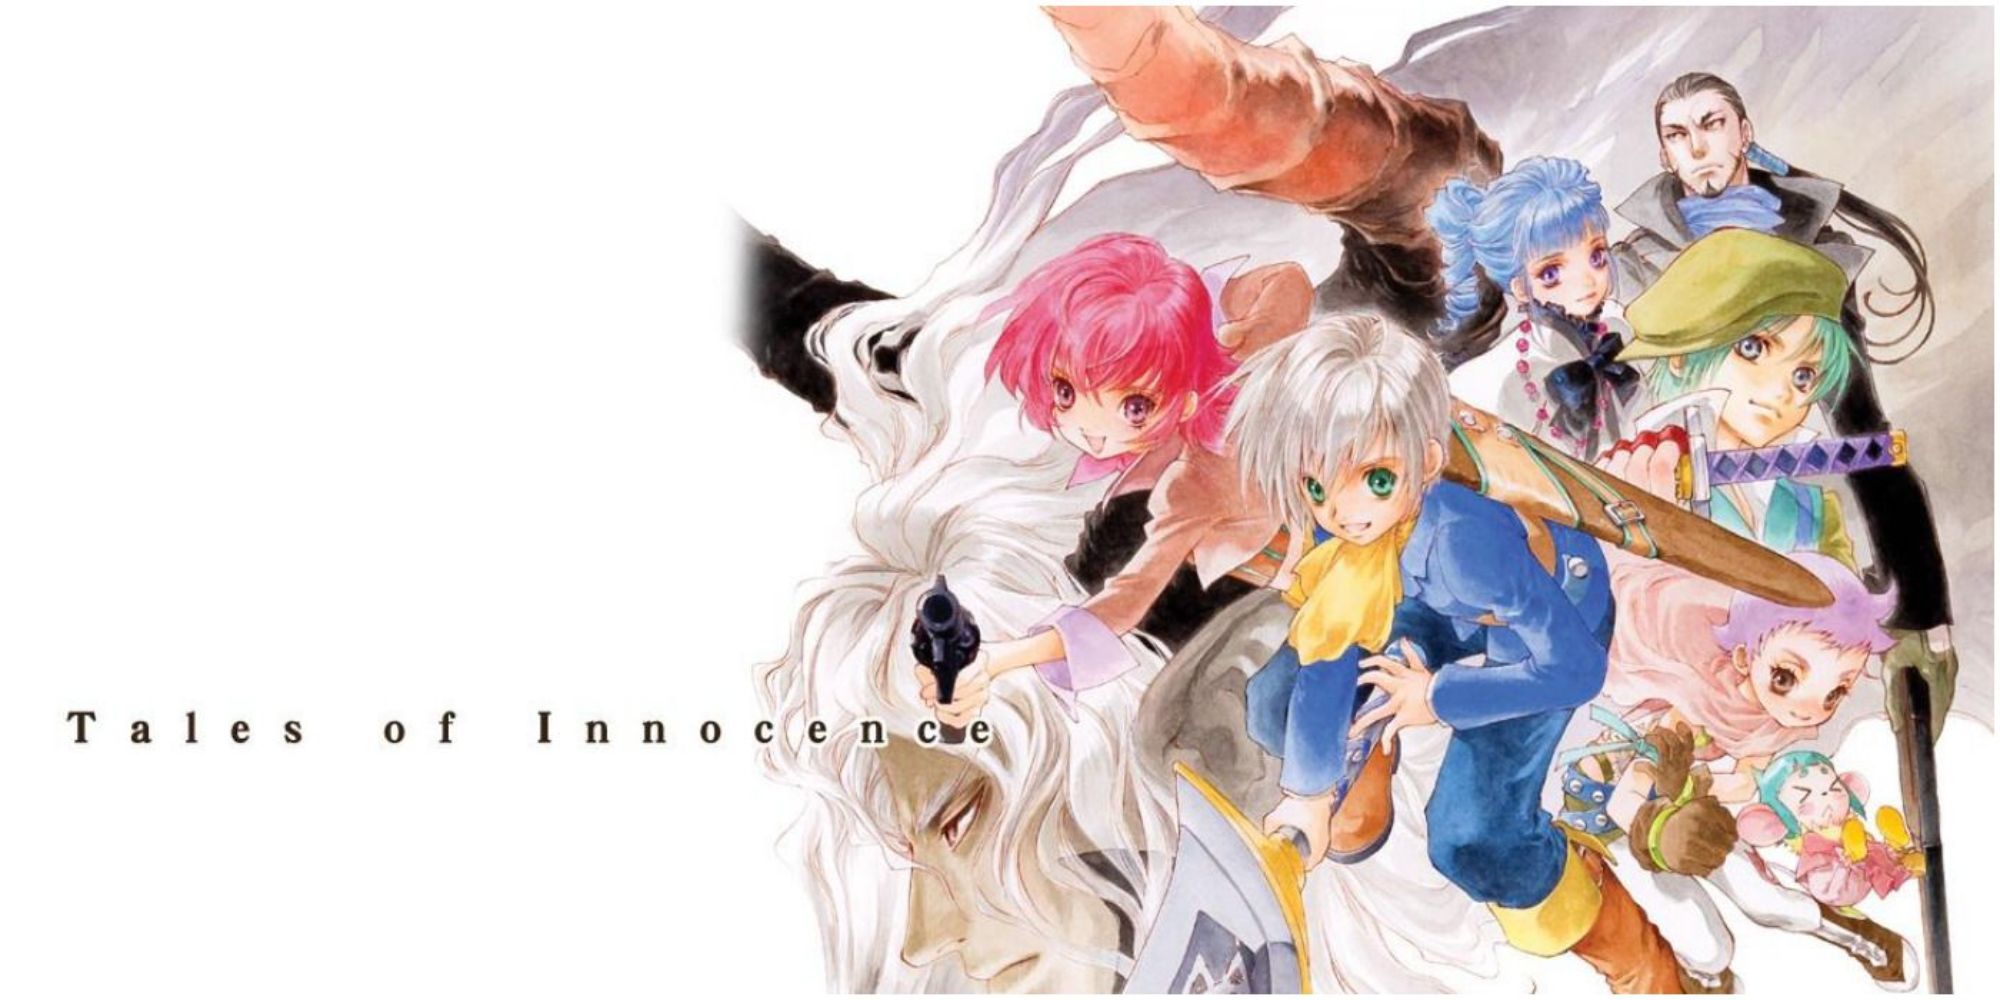 Tales of Innocence - key artwork showing the main characters